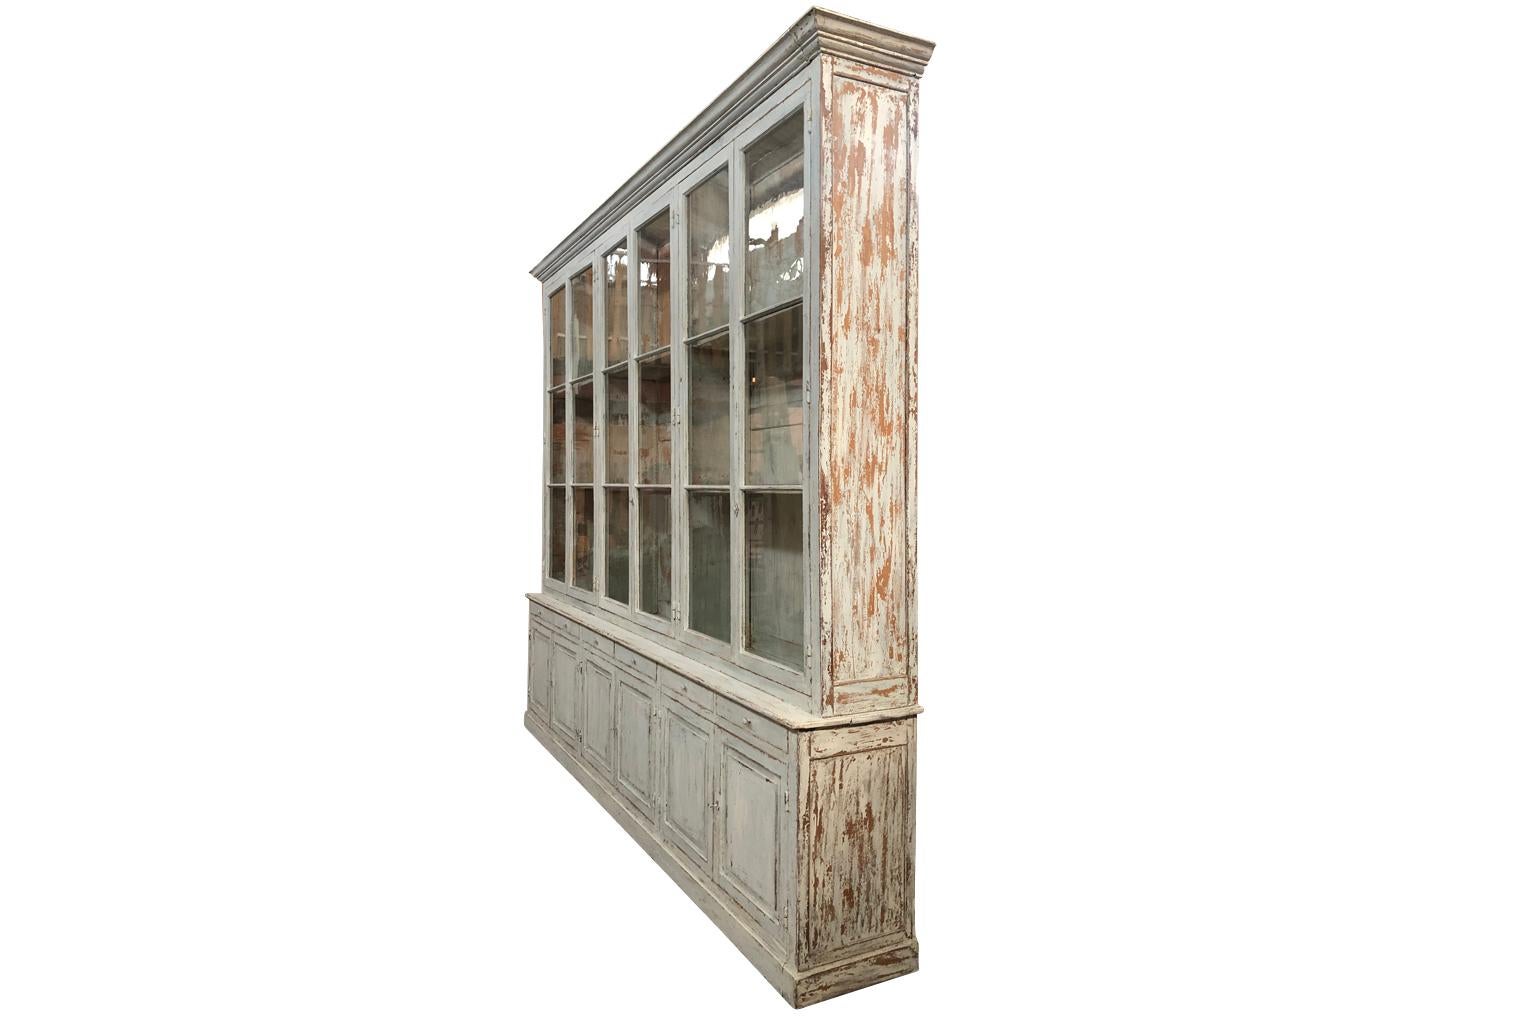 An outstanding and exceptional 19th century Deux corps bookcase - bibliotheque from the Provence area of France. Grand scale with beautiful display and storage capacity.